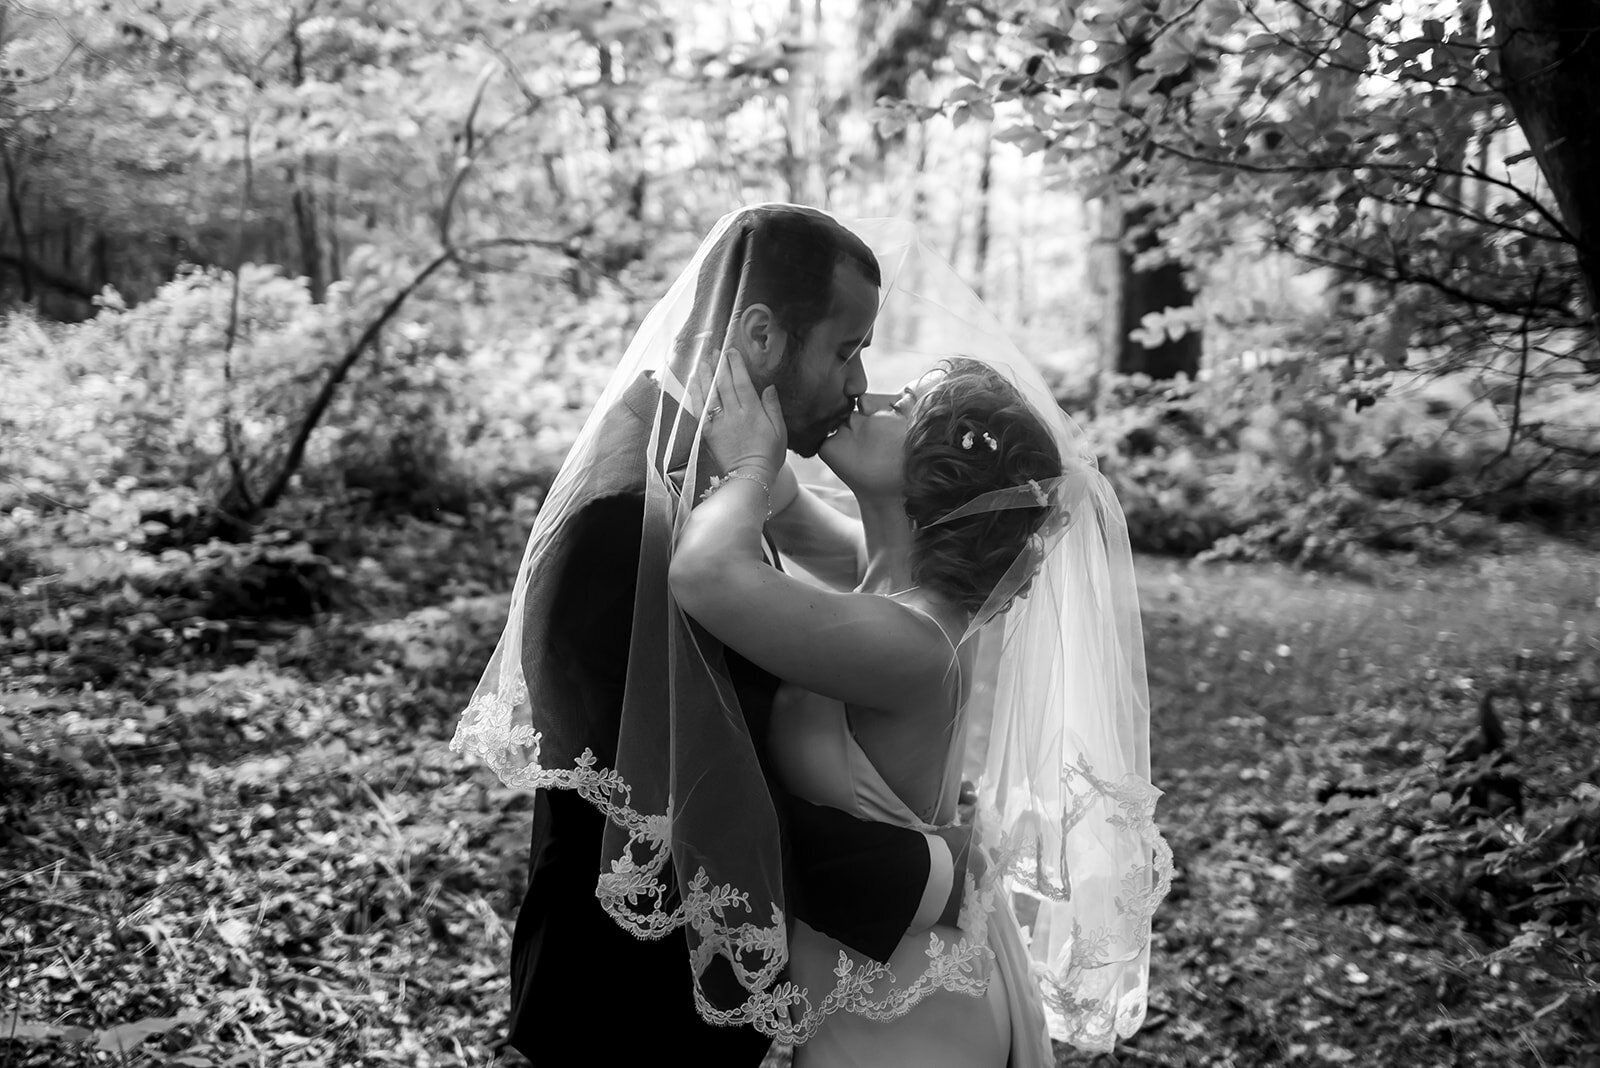 Black and White Bride and Groom Wedding Photography.jpg